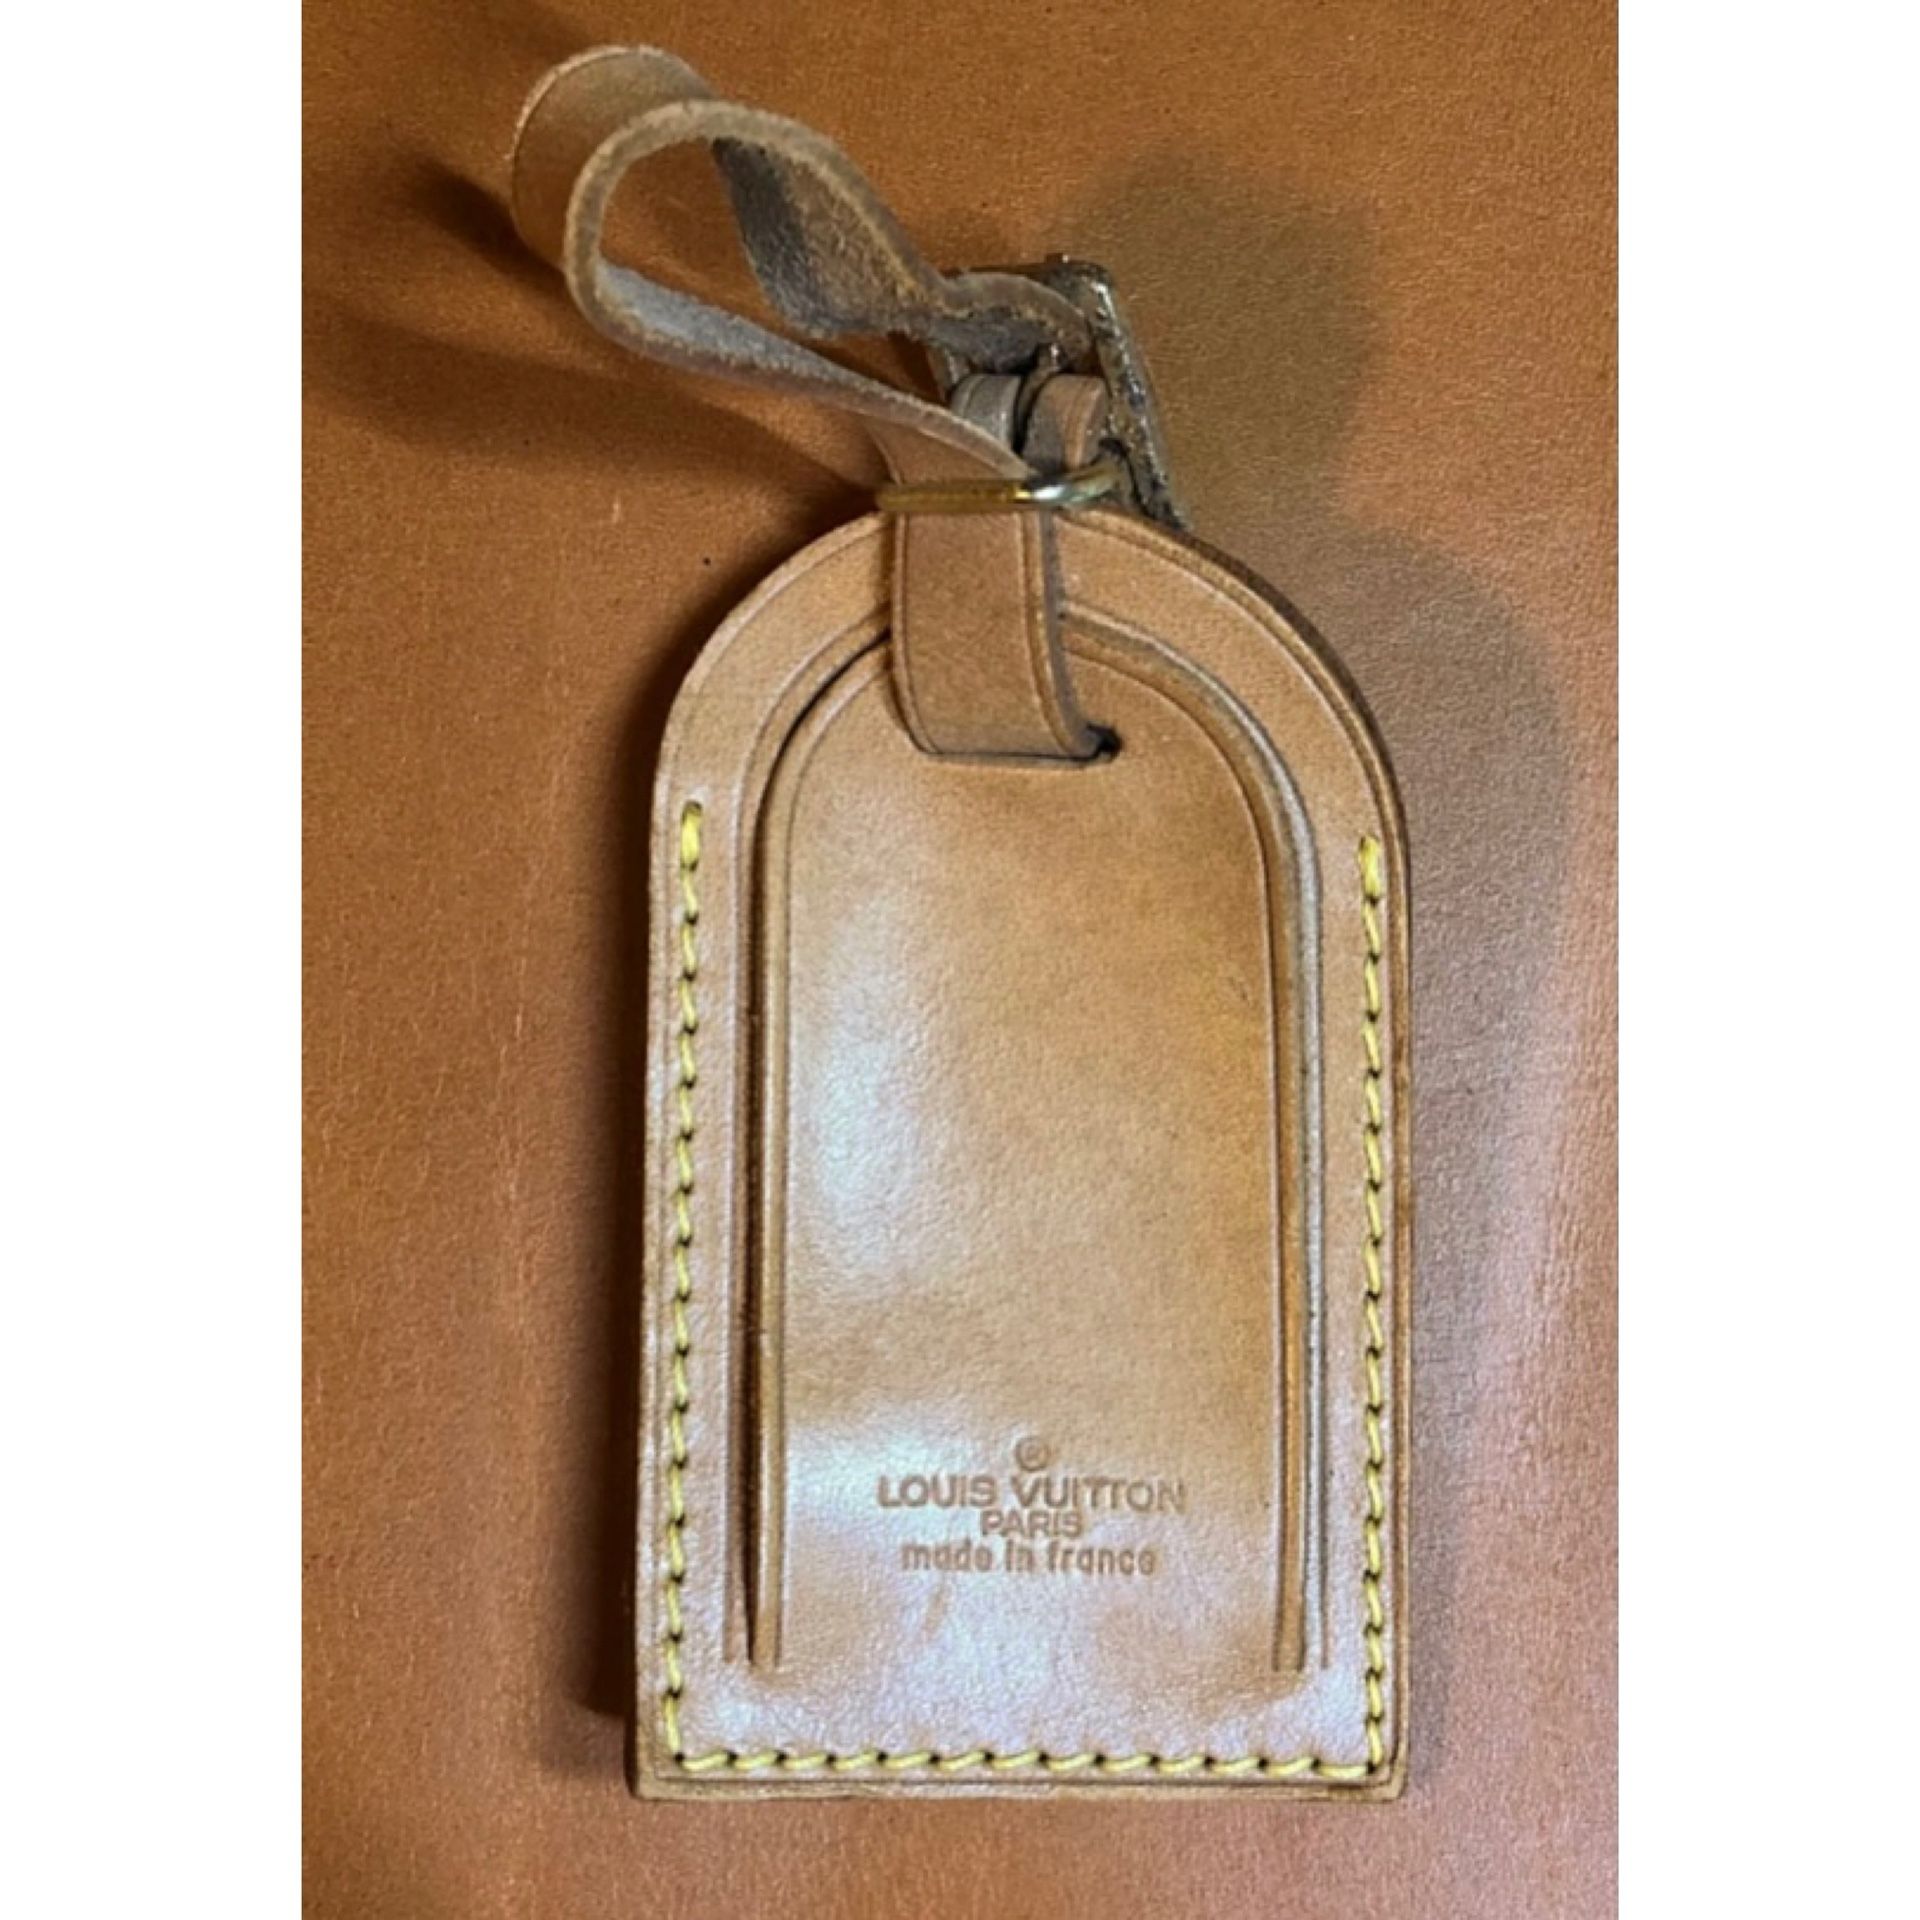 UNISEX Authentic Louis Vuitton Luggage Bag ID Tag